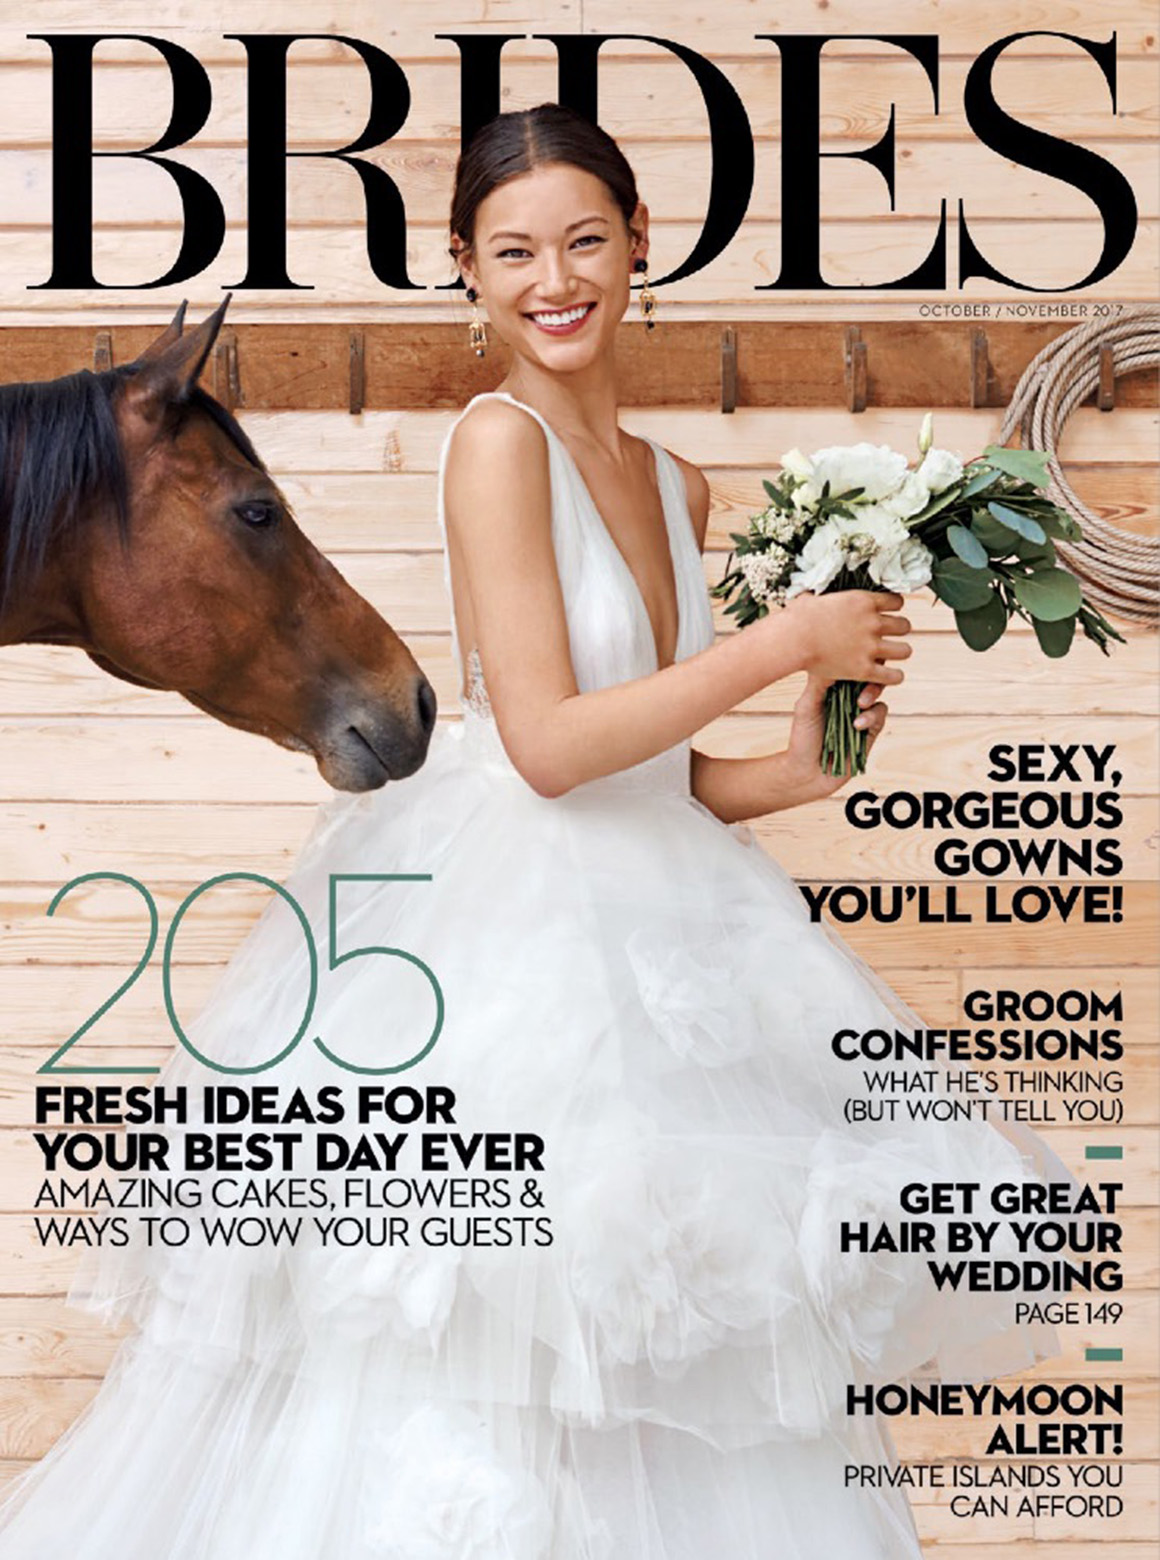 Cover of Brides Magazine featuring a bride in a barn holding a bouquet with a horse behind her. The October 2017 issue is titled "205 Fresh ideas for your best day ever."